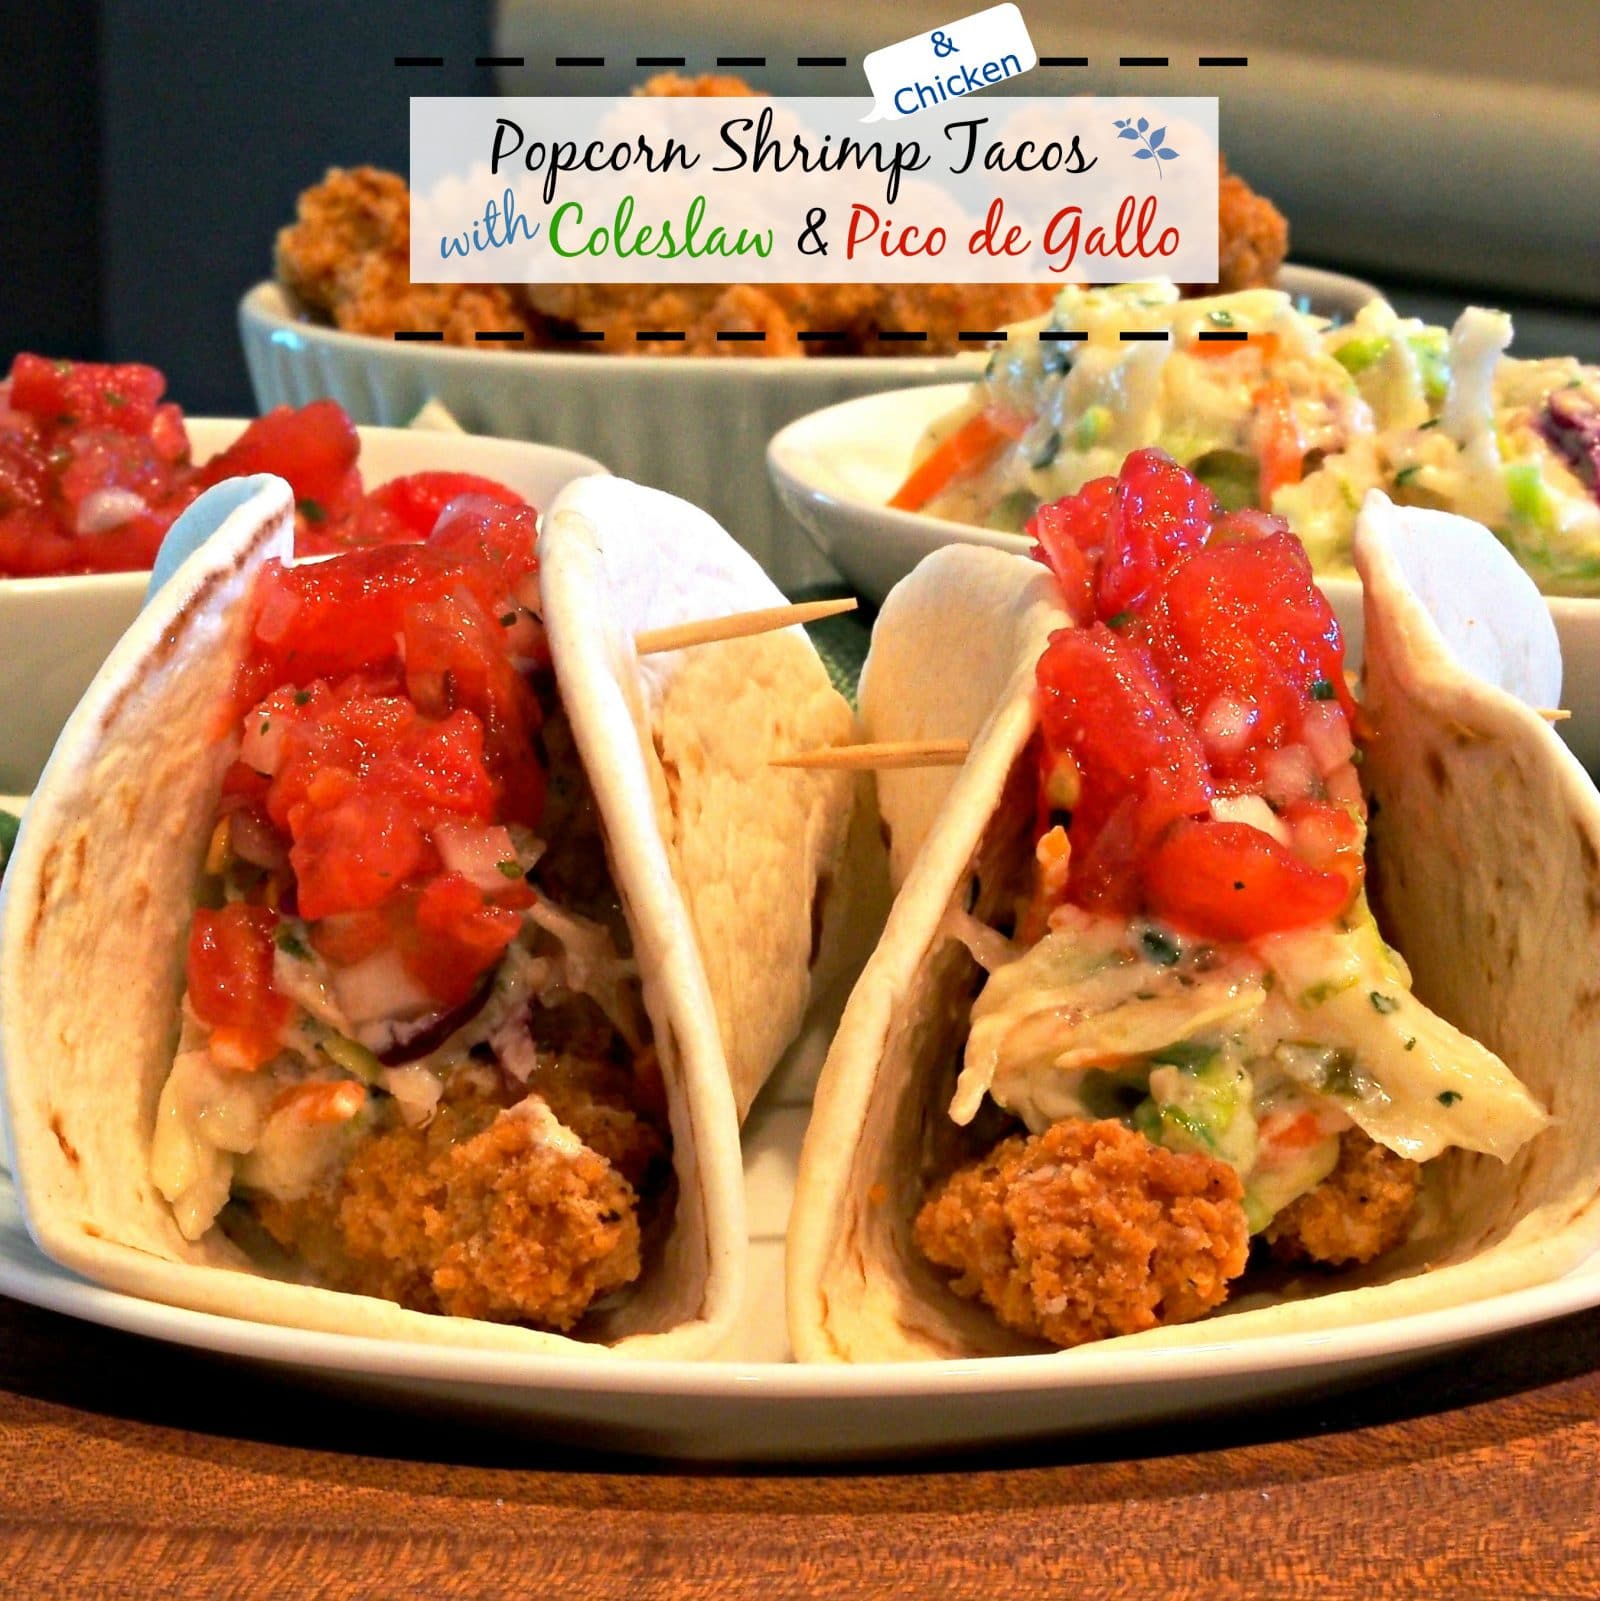 Popcorn Shrimp Tacos with Coleslaw & Pico de Gallo is packed with flavor and textures. A dish you will make again and again.